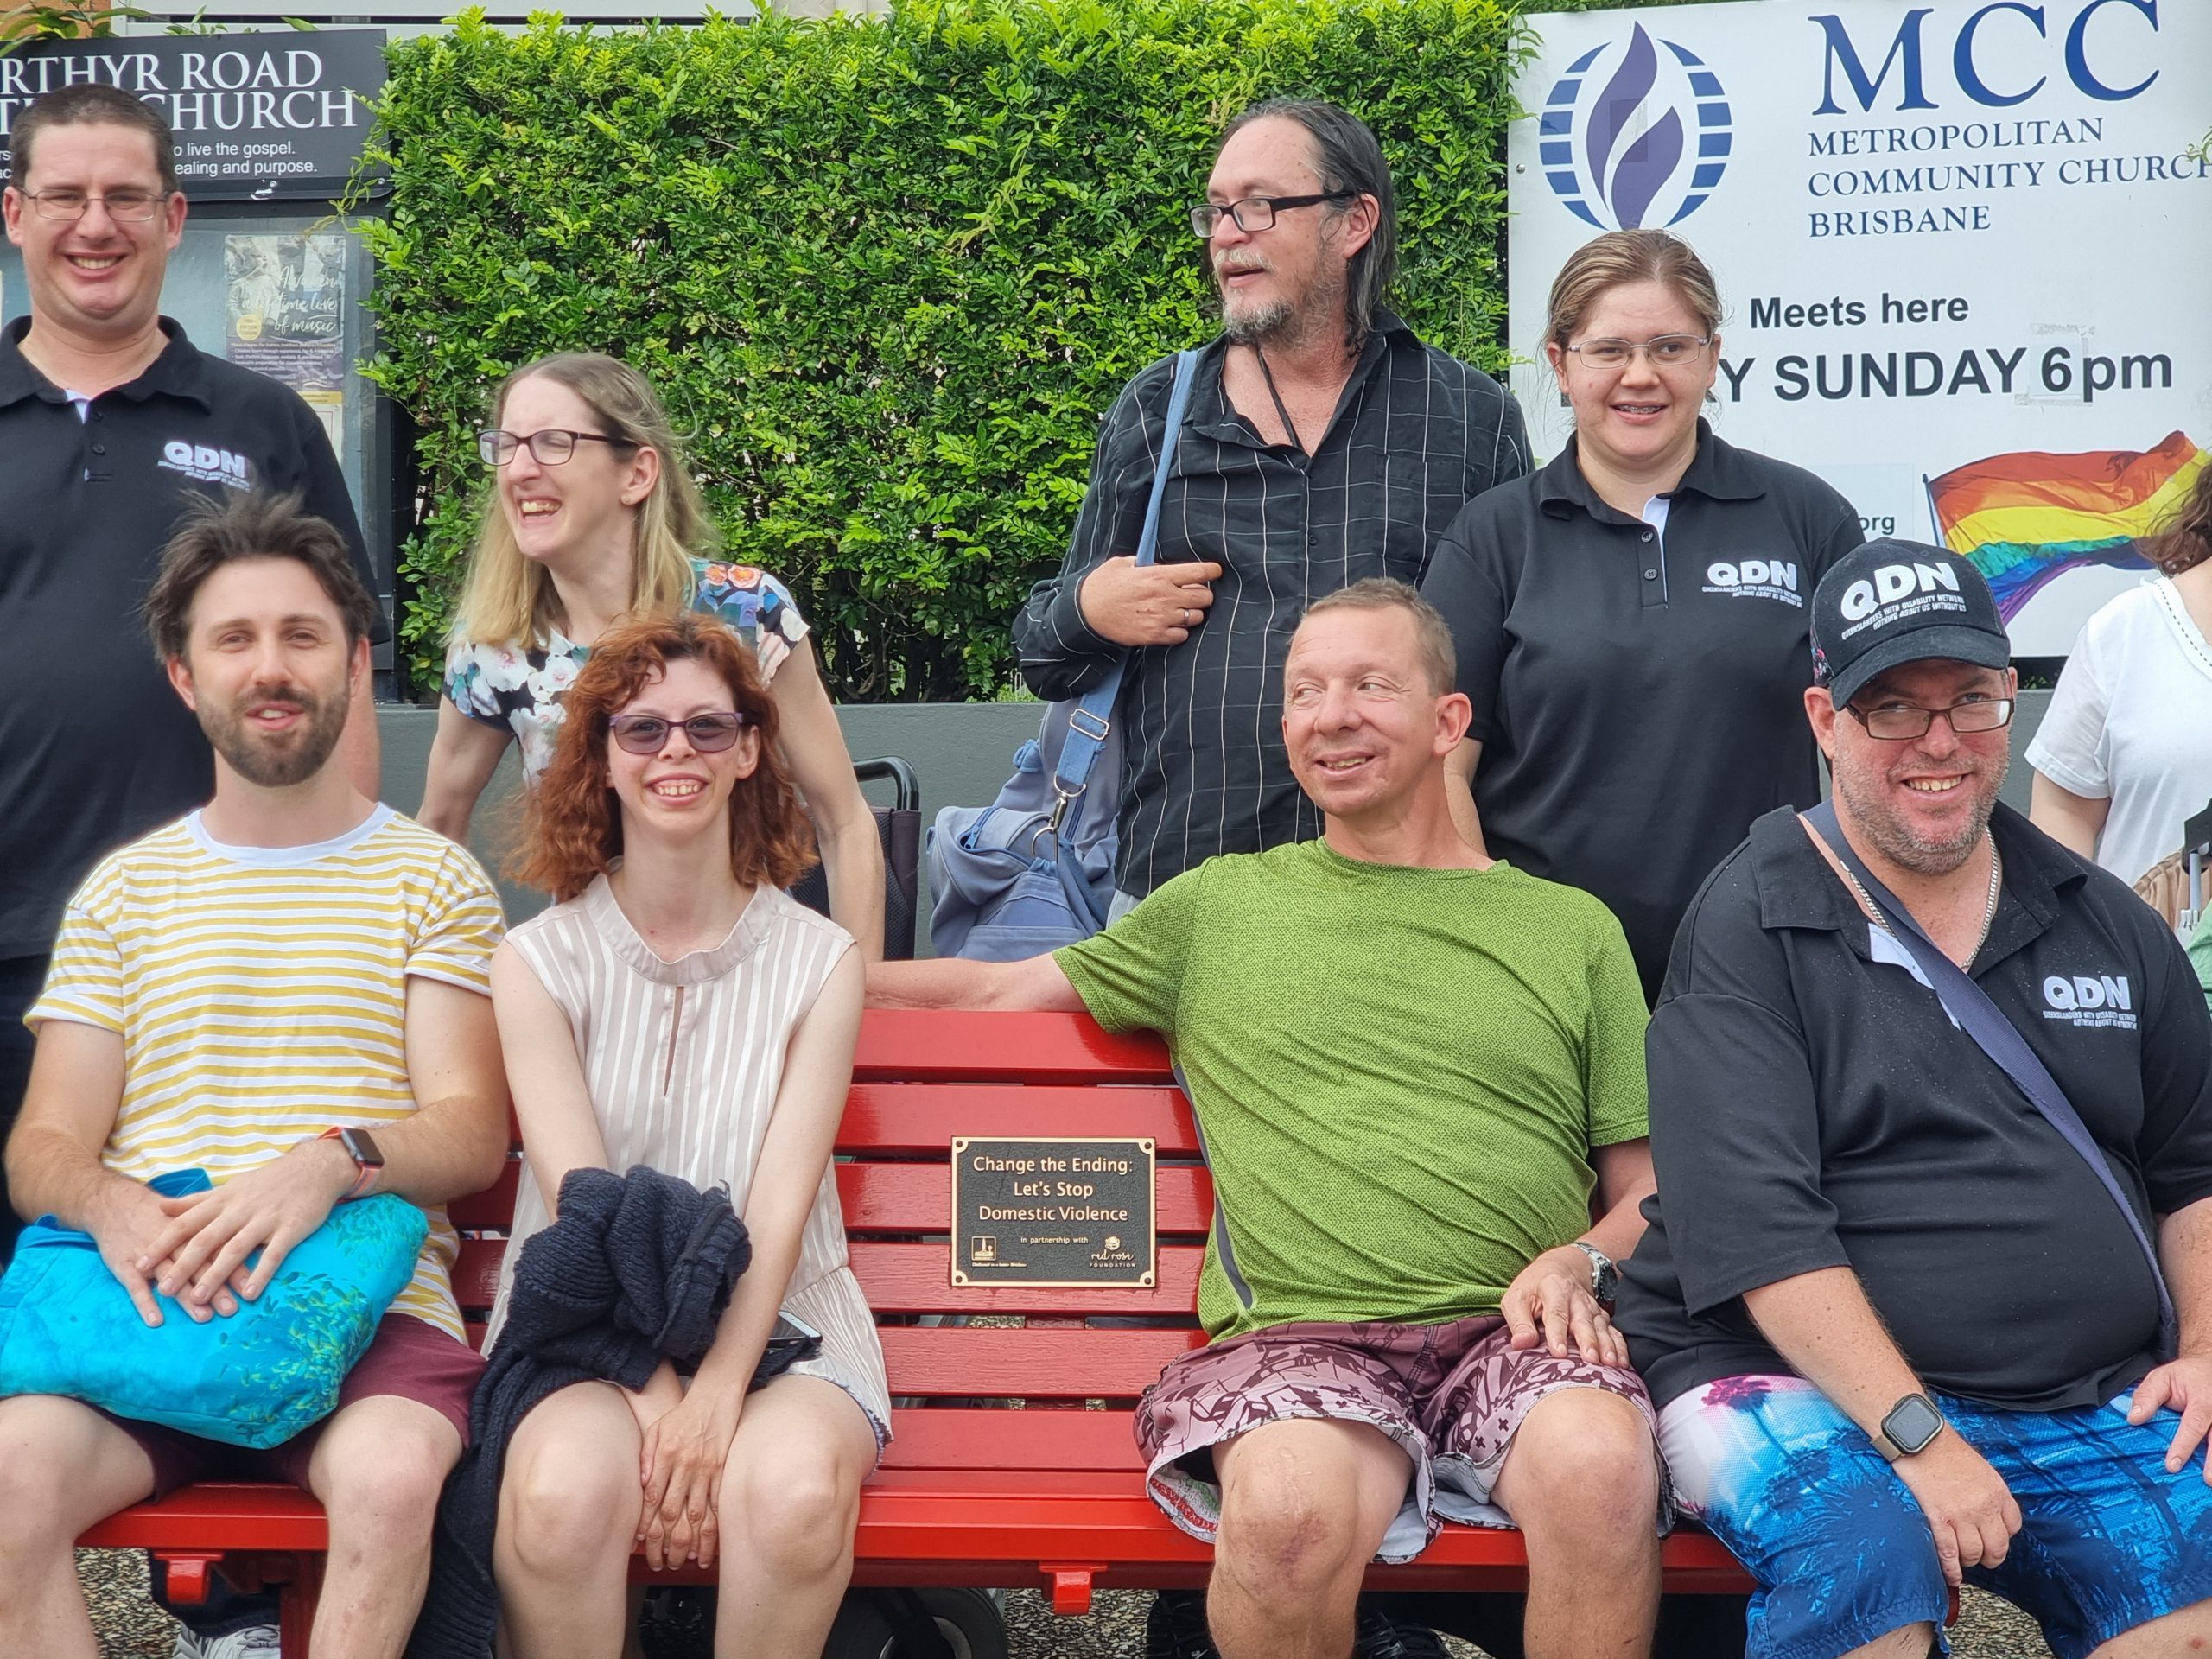 A group of people sitting on a bench and some standing behind. They are all smiling and most are looking at the camera.